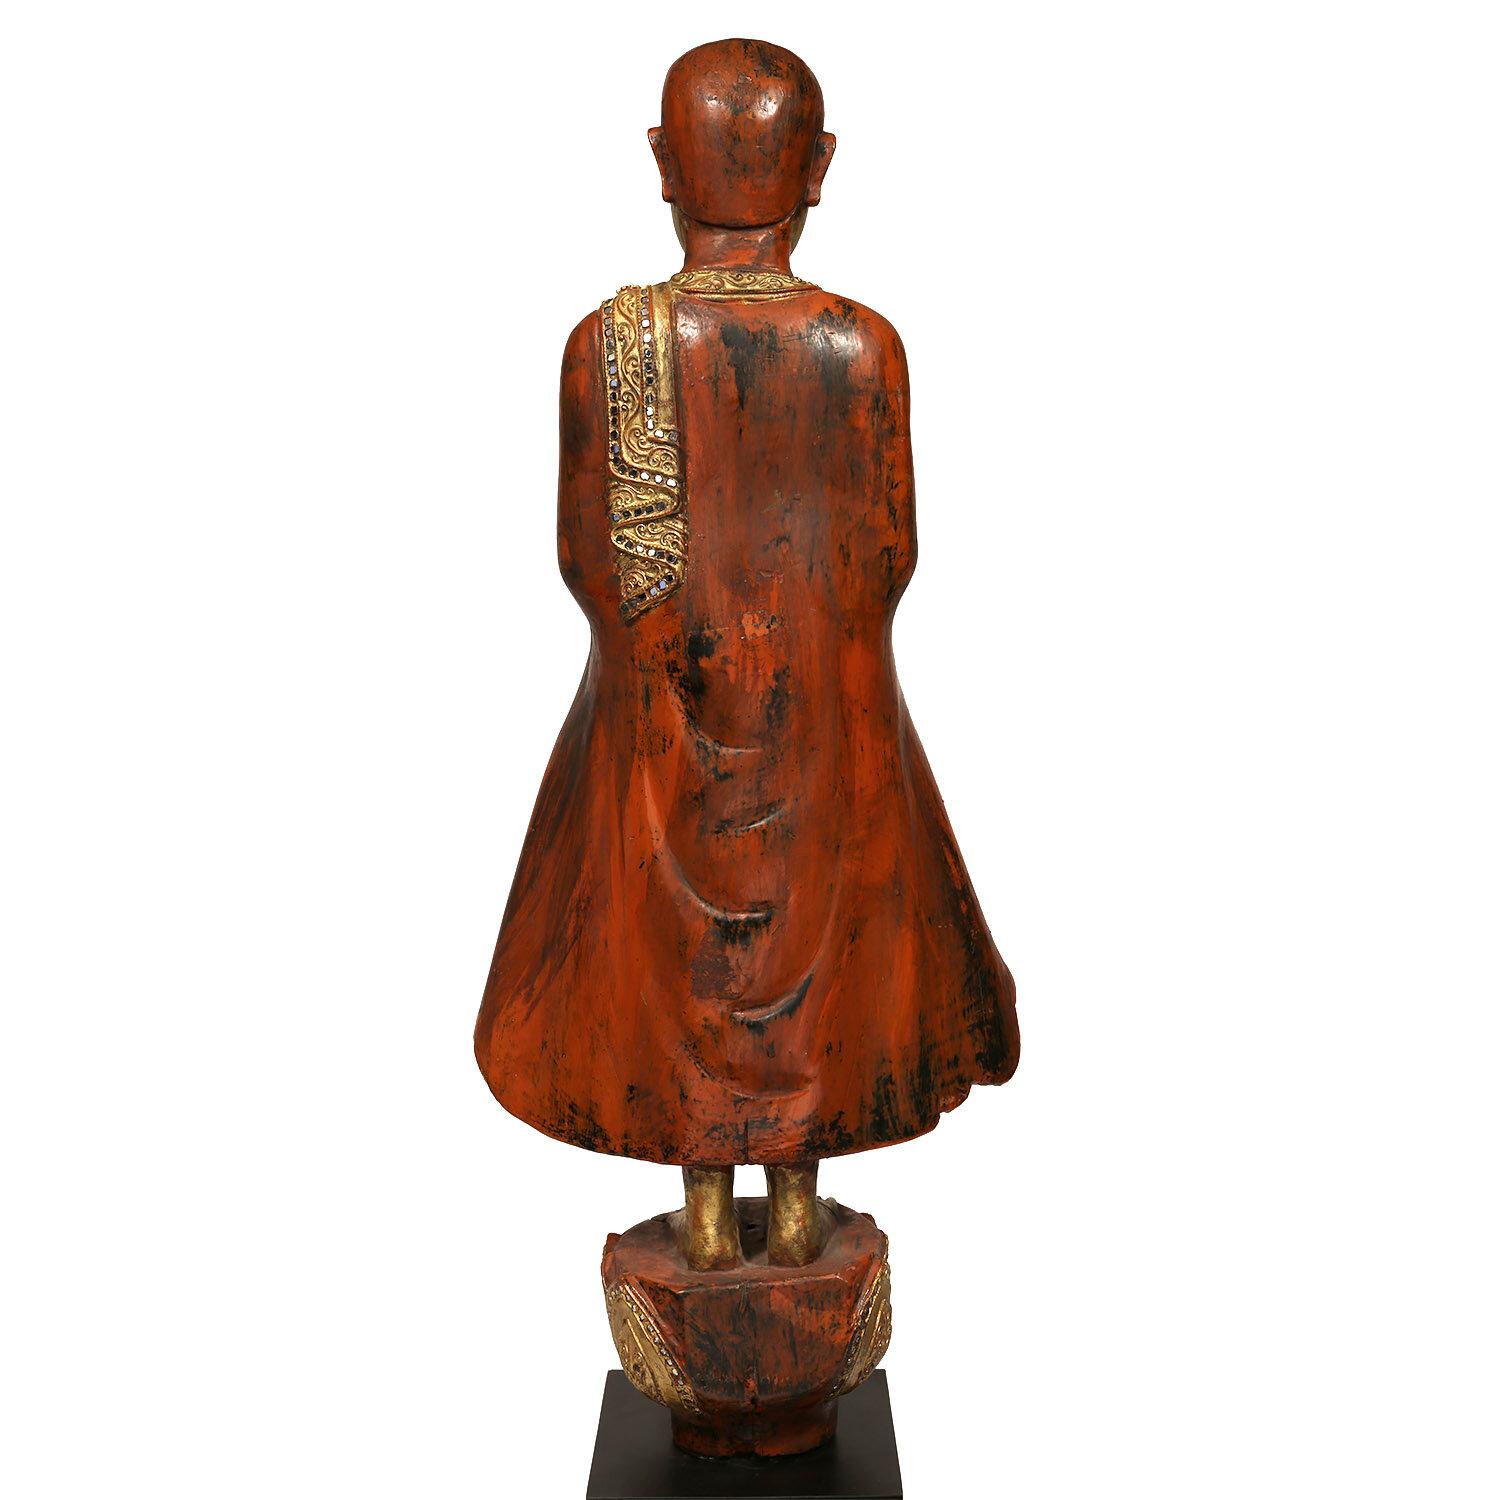 Lacquered Tall Vintage Burmese Mandalay-Style Bejeweled Buddhist Monk Statue